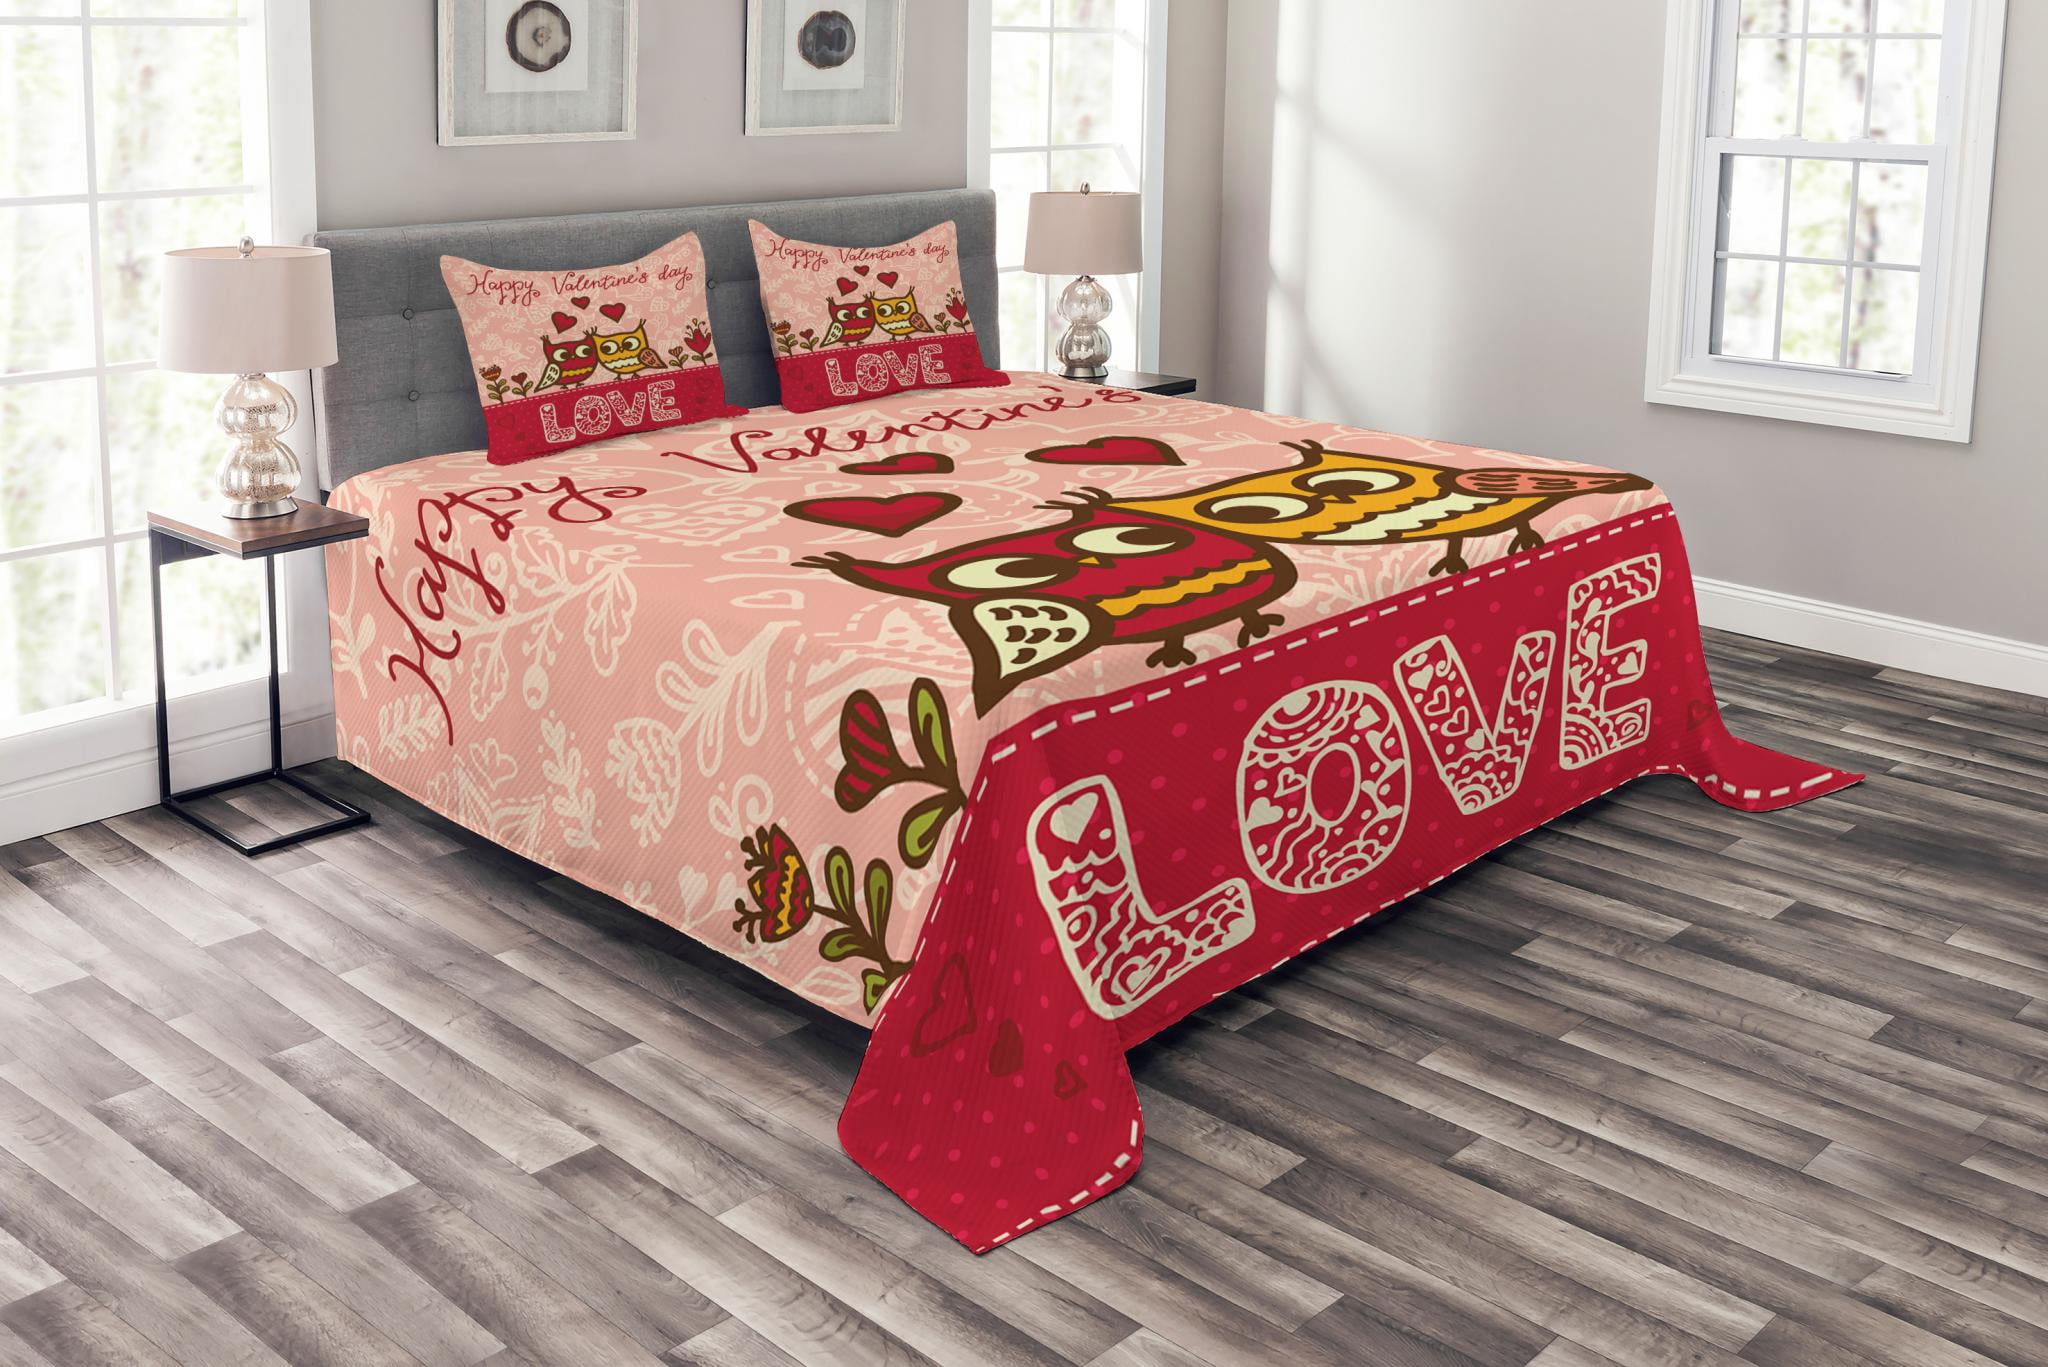 Details about   Colorful Quilted Bedspread & Pillow Shams Set Cute Hearts Flowers Print